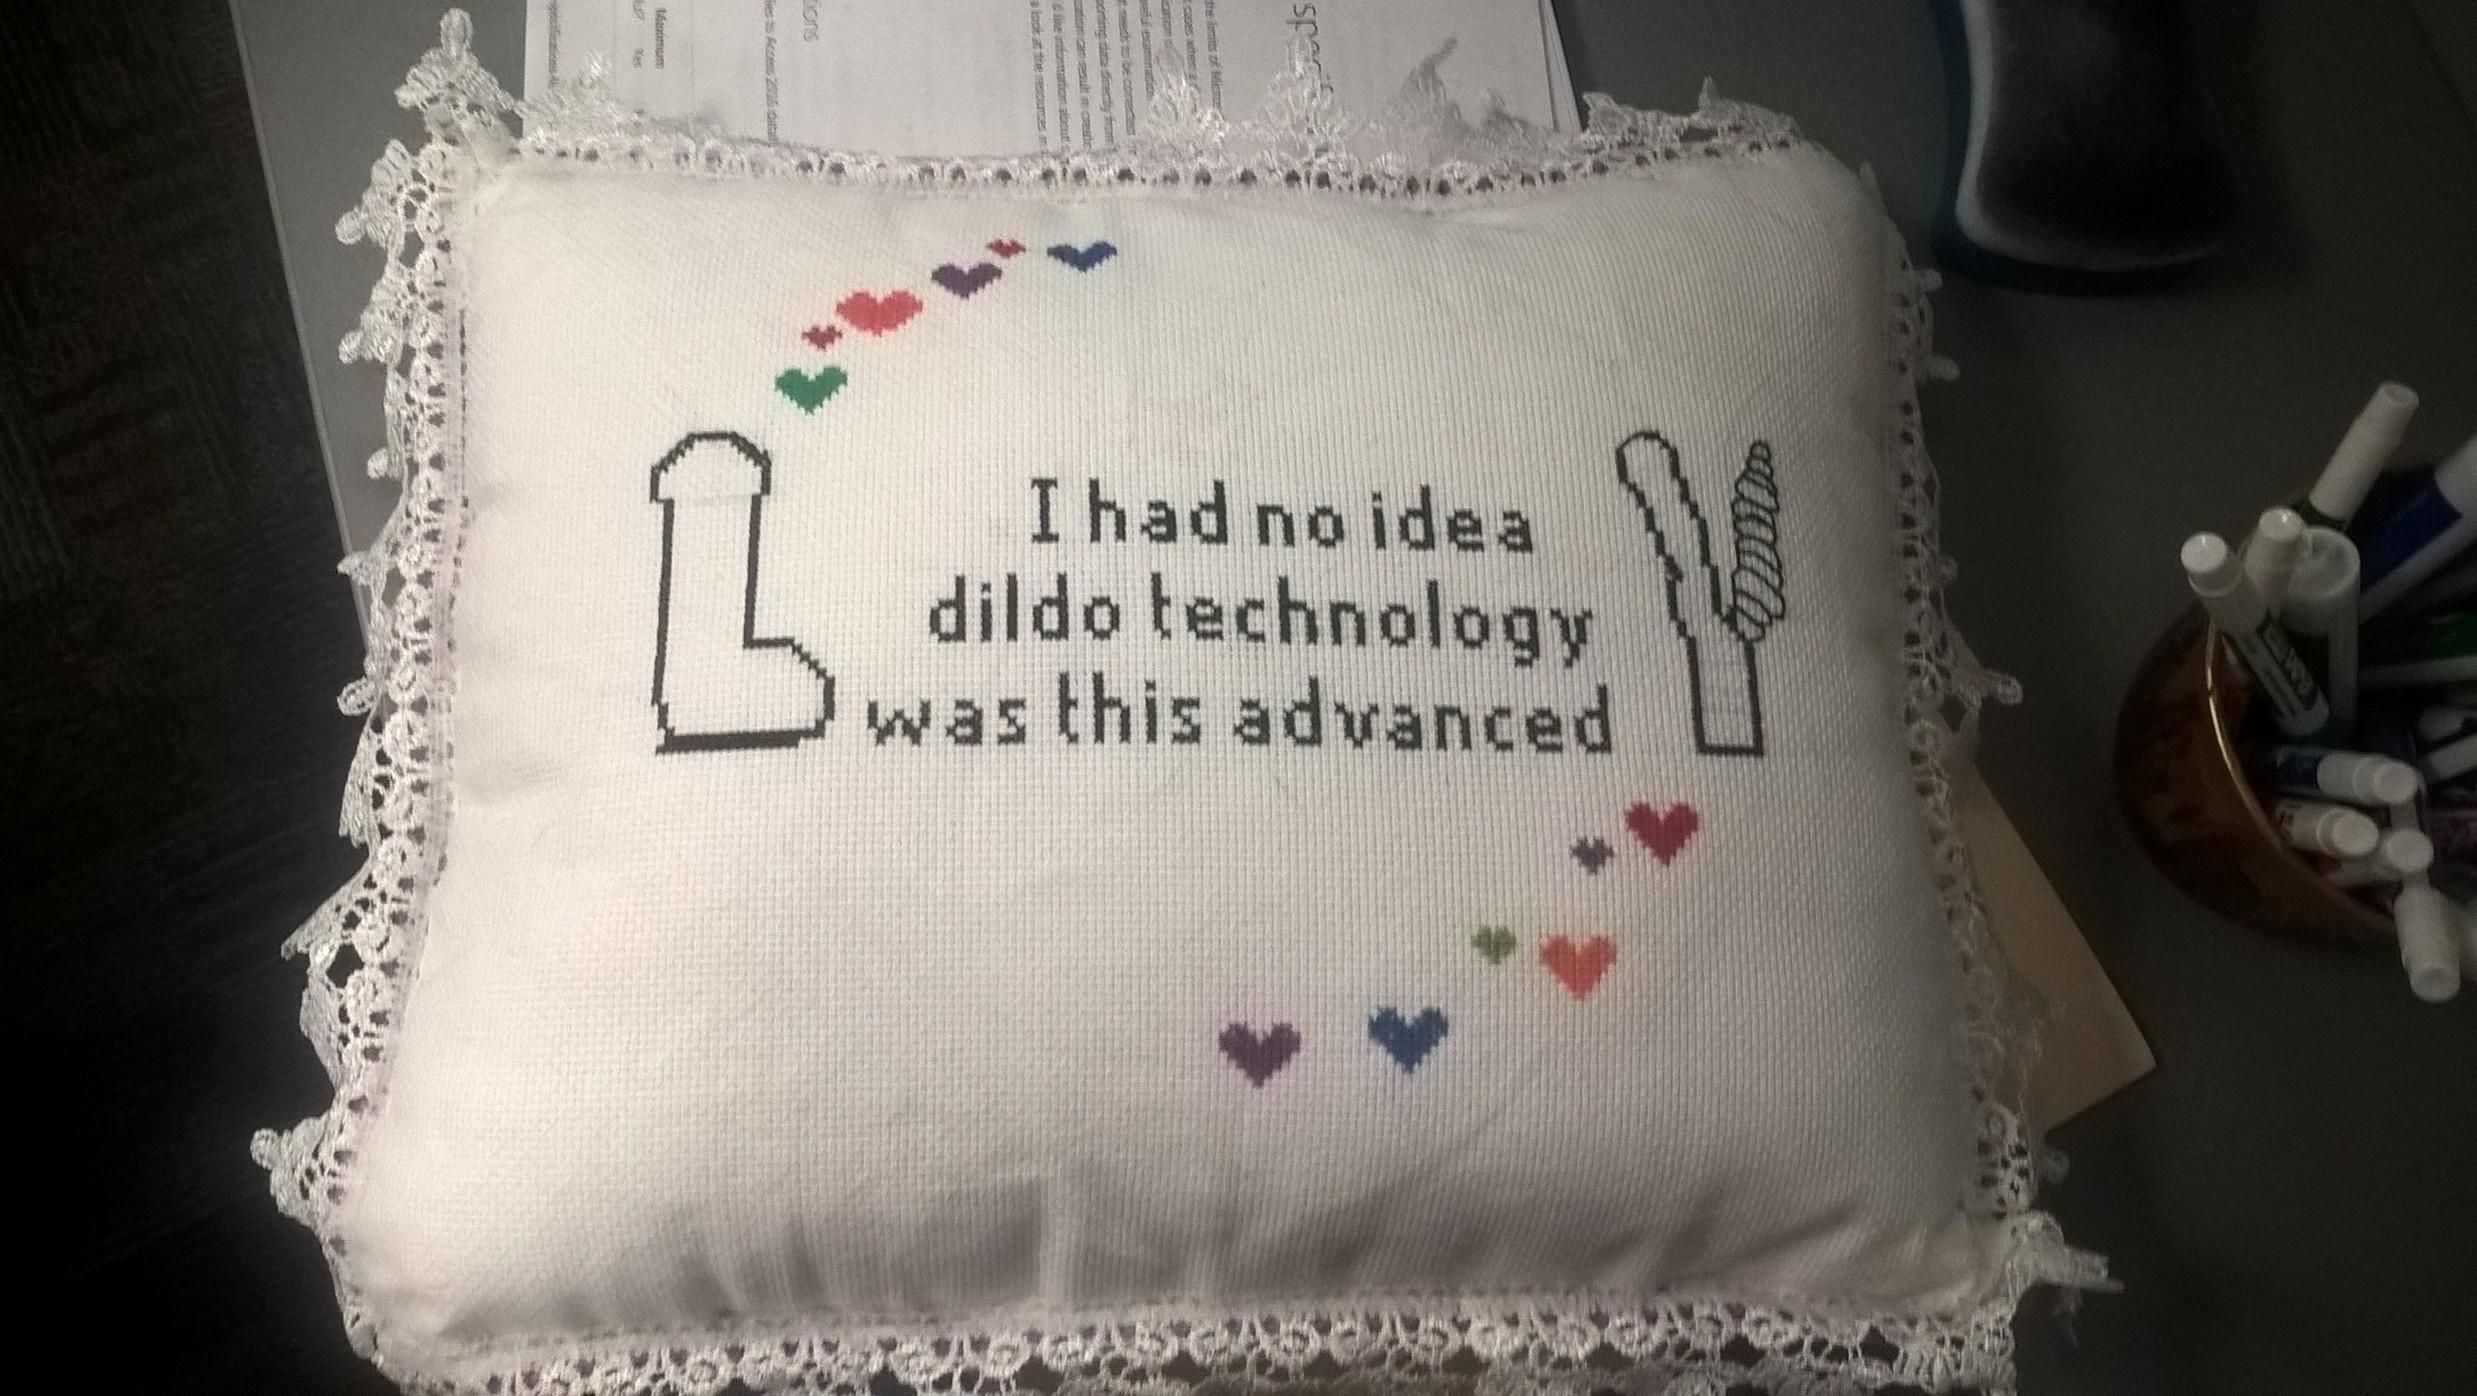 My fiancee decided to cross-stitch this quote from her friend on a pillow.